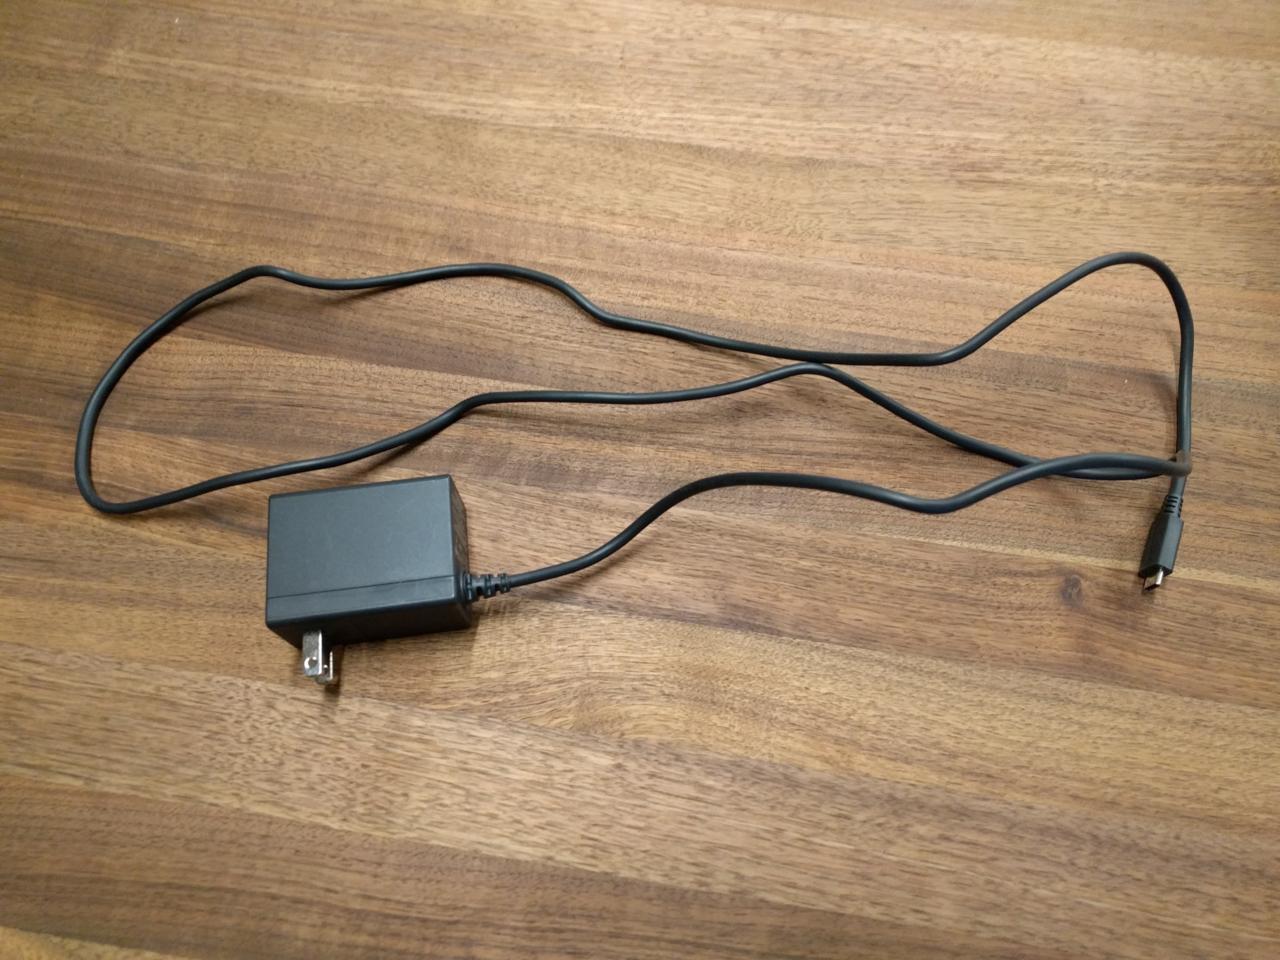 The Switch’s AC adapter uses a wall wart, which means it’s best suited for the tail end of a power strip.